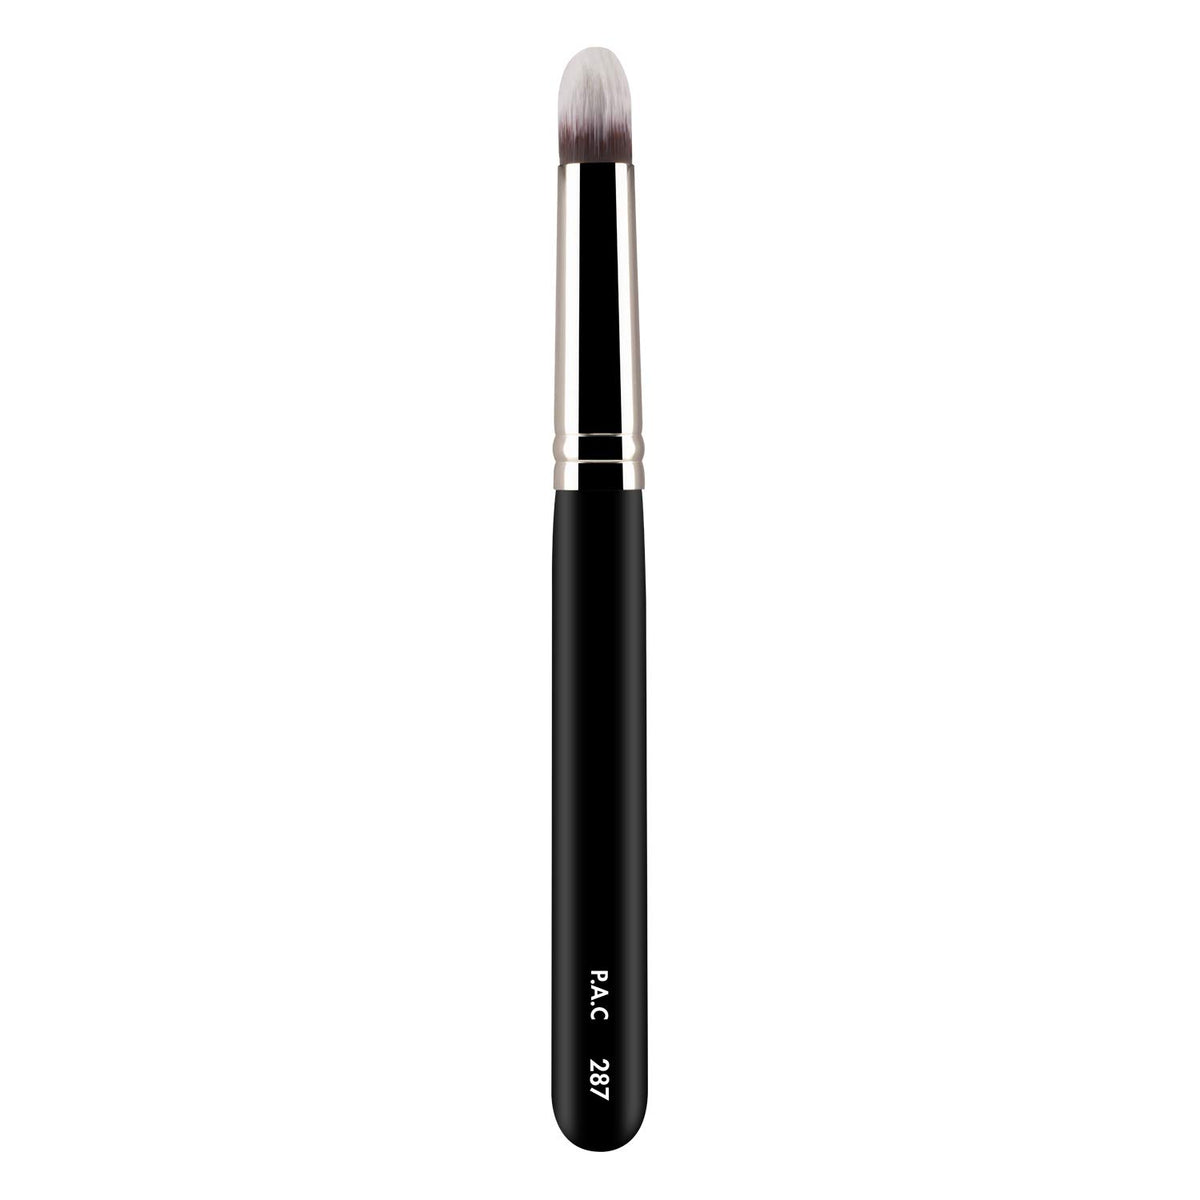 PAC Concealer Brush 287 PAC